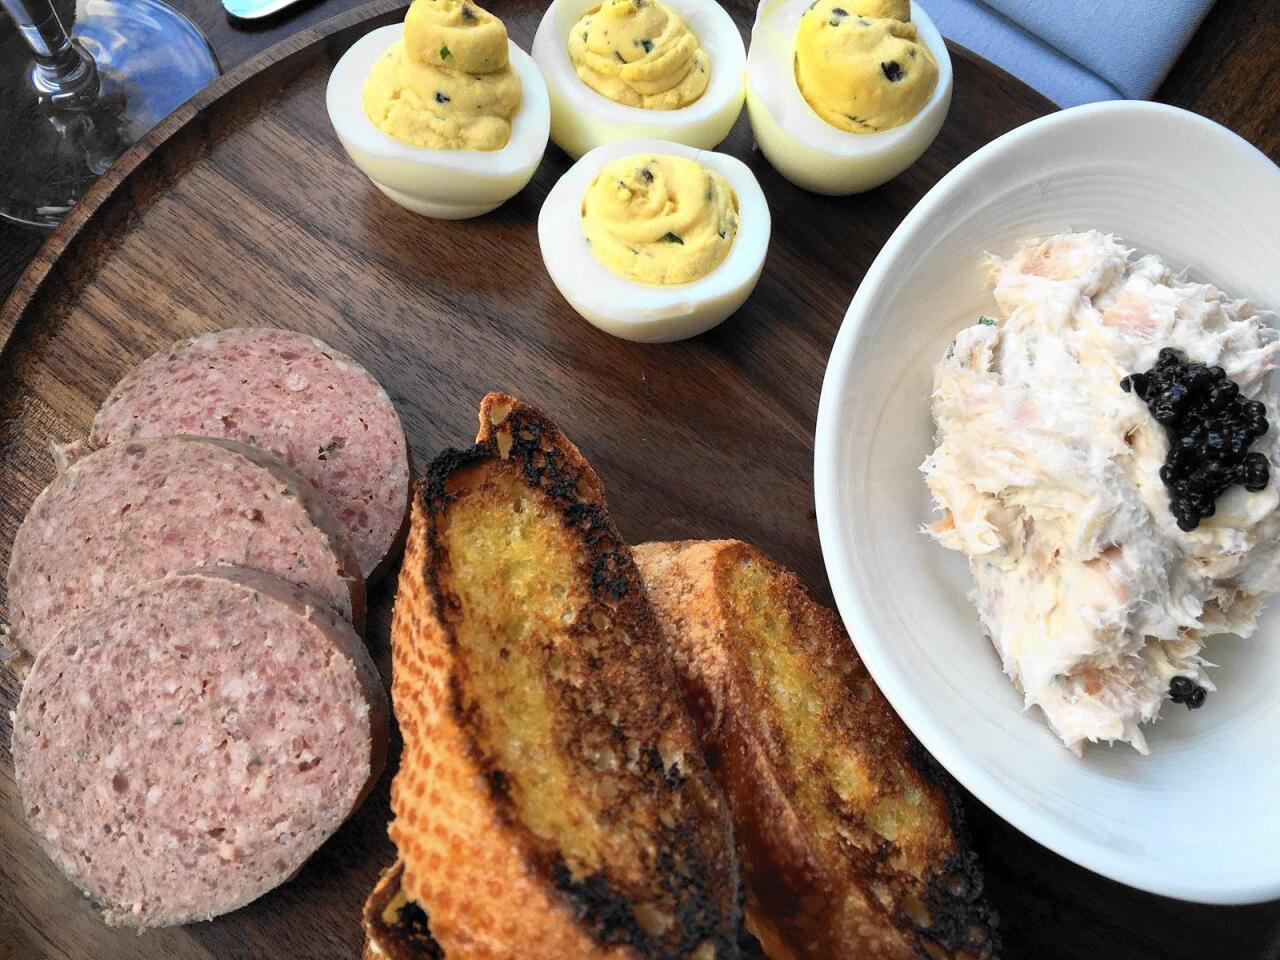 Lazy Susan choices at Supper in Milwaukee include housemade braunschweiger, smoked trout mousse and black truffle deviled eggs.